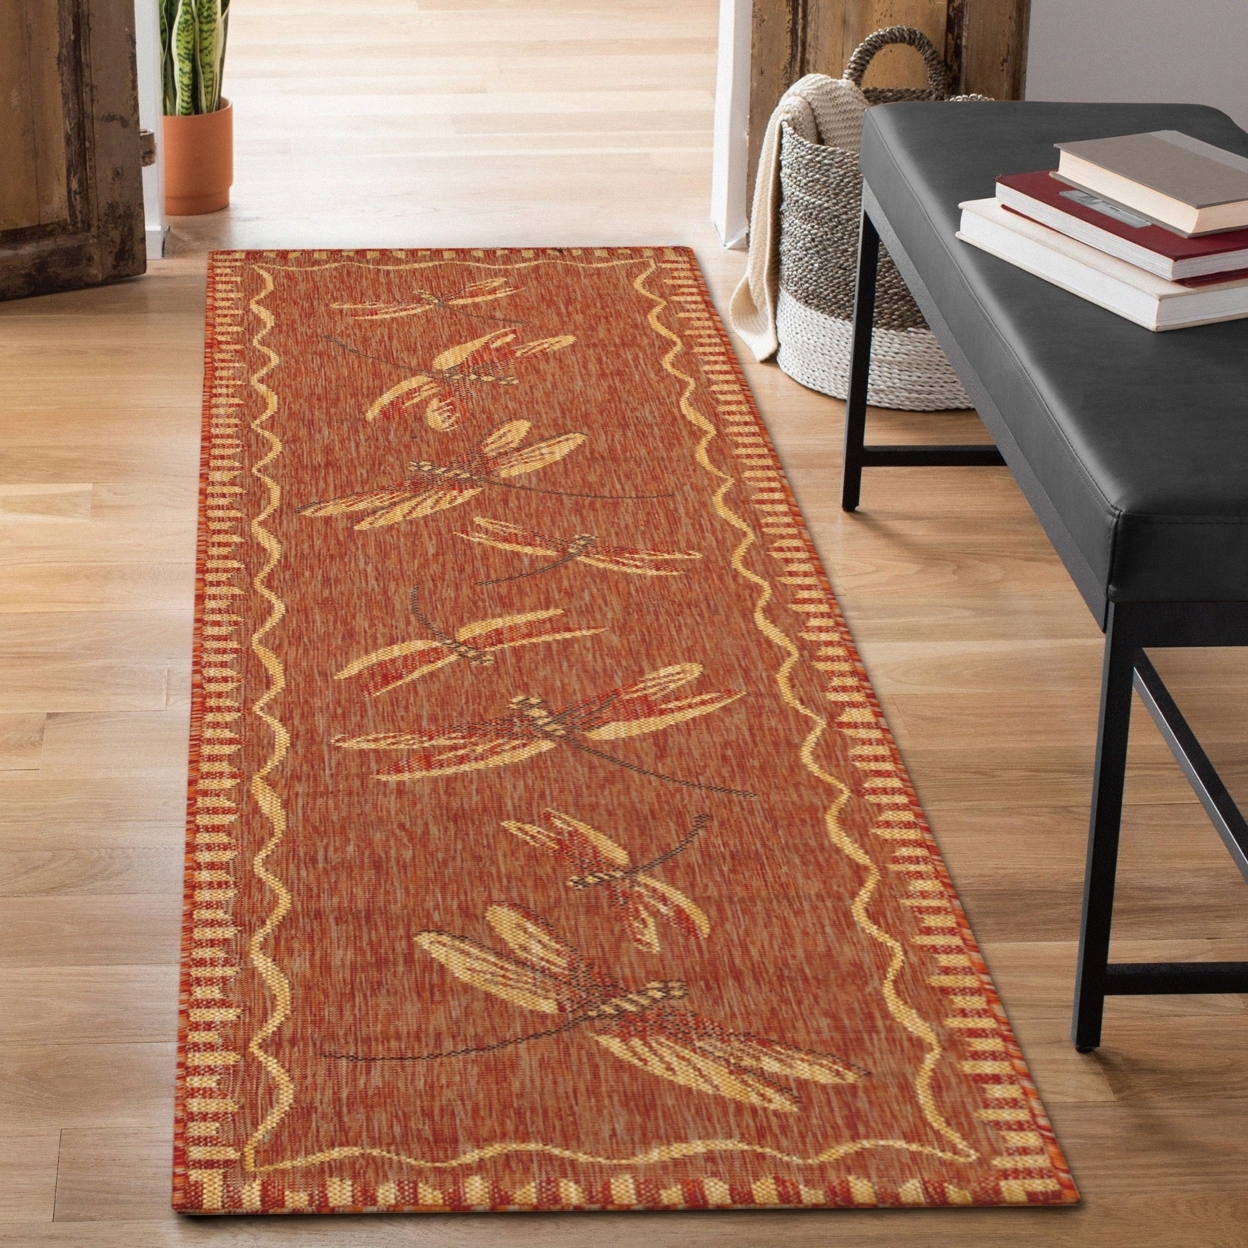 Liora Manne Carmel Dragonfly Indoor Outdoor Area Rug Red - 7'10 X 9'10